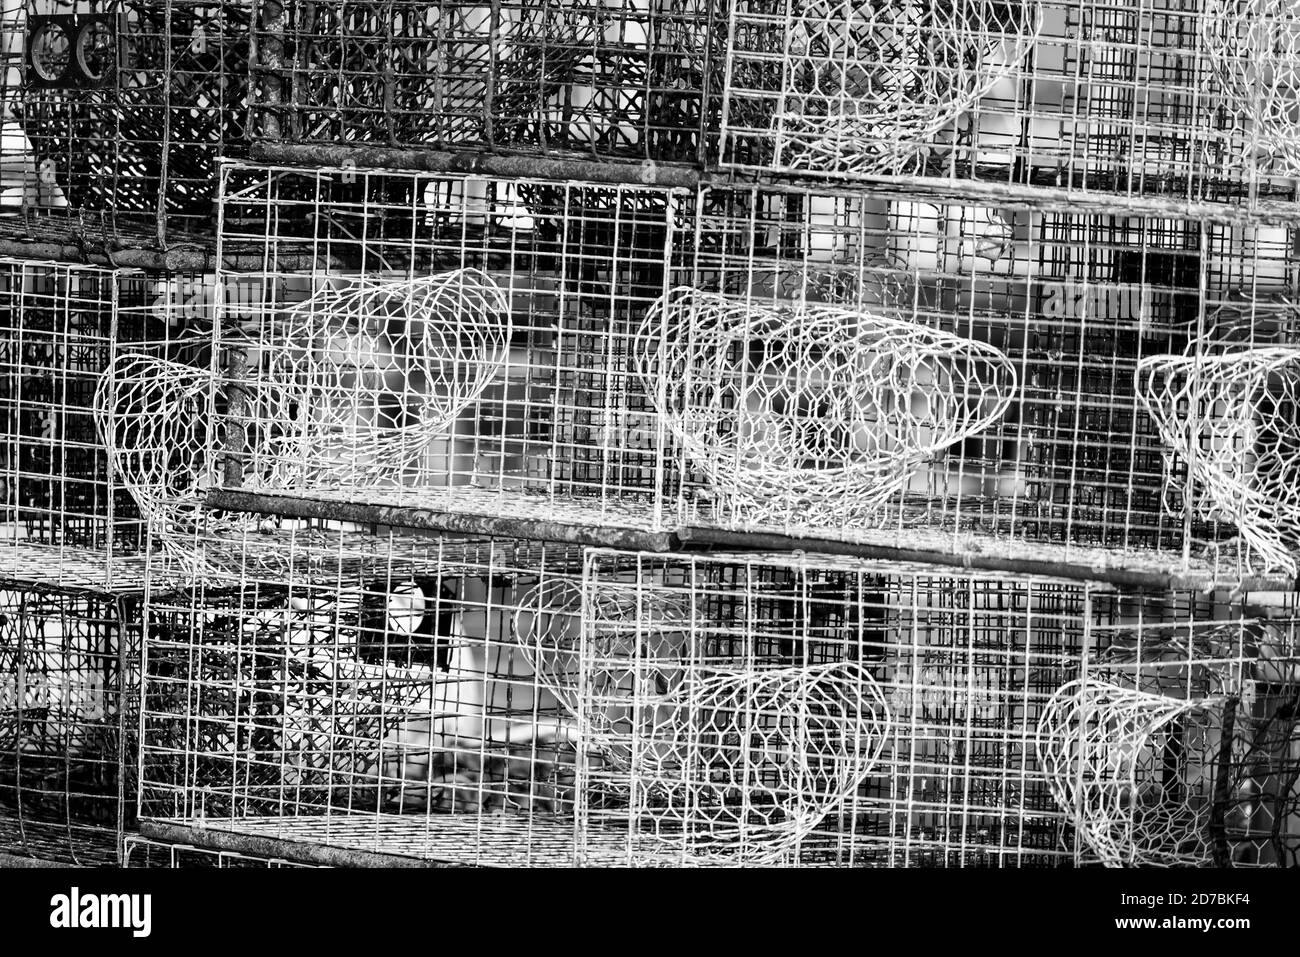 Commercial fishing equipment. Close up of traps used to catch